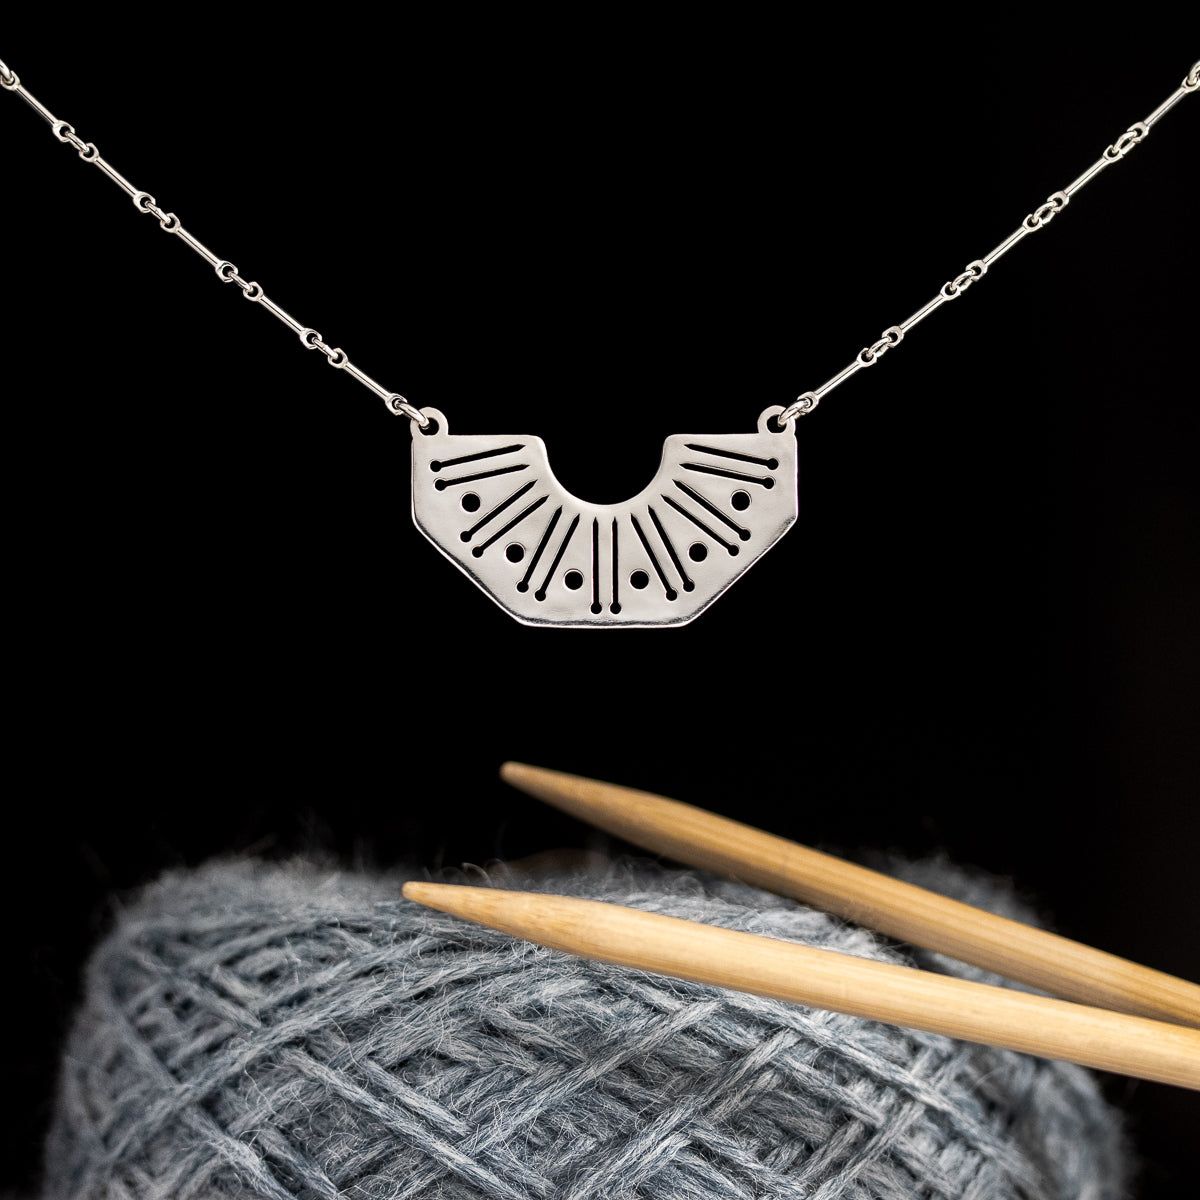  Silver Knitting Needles and Yarn Motif Necklace